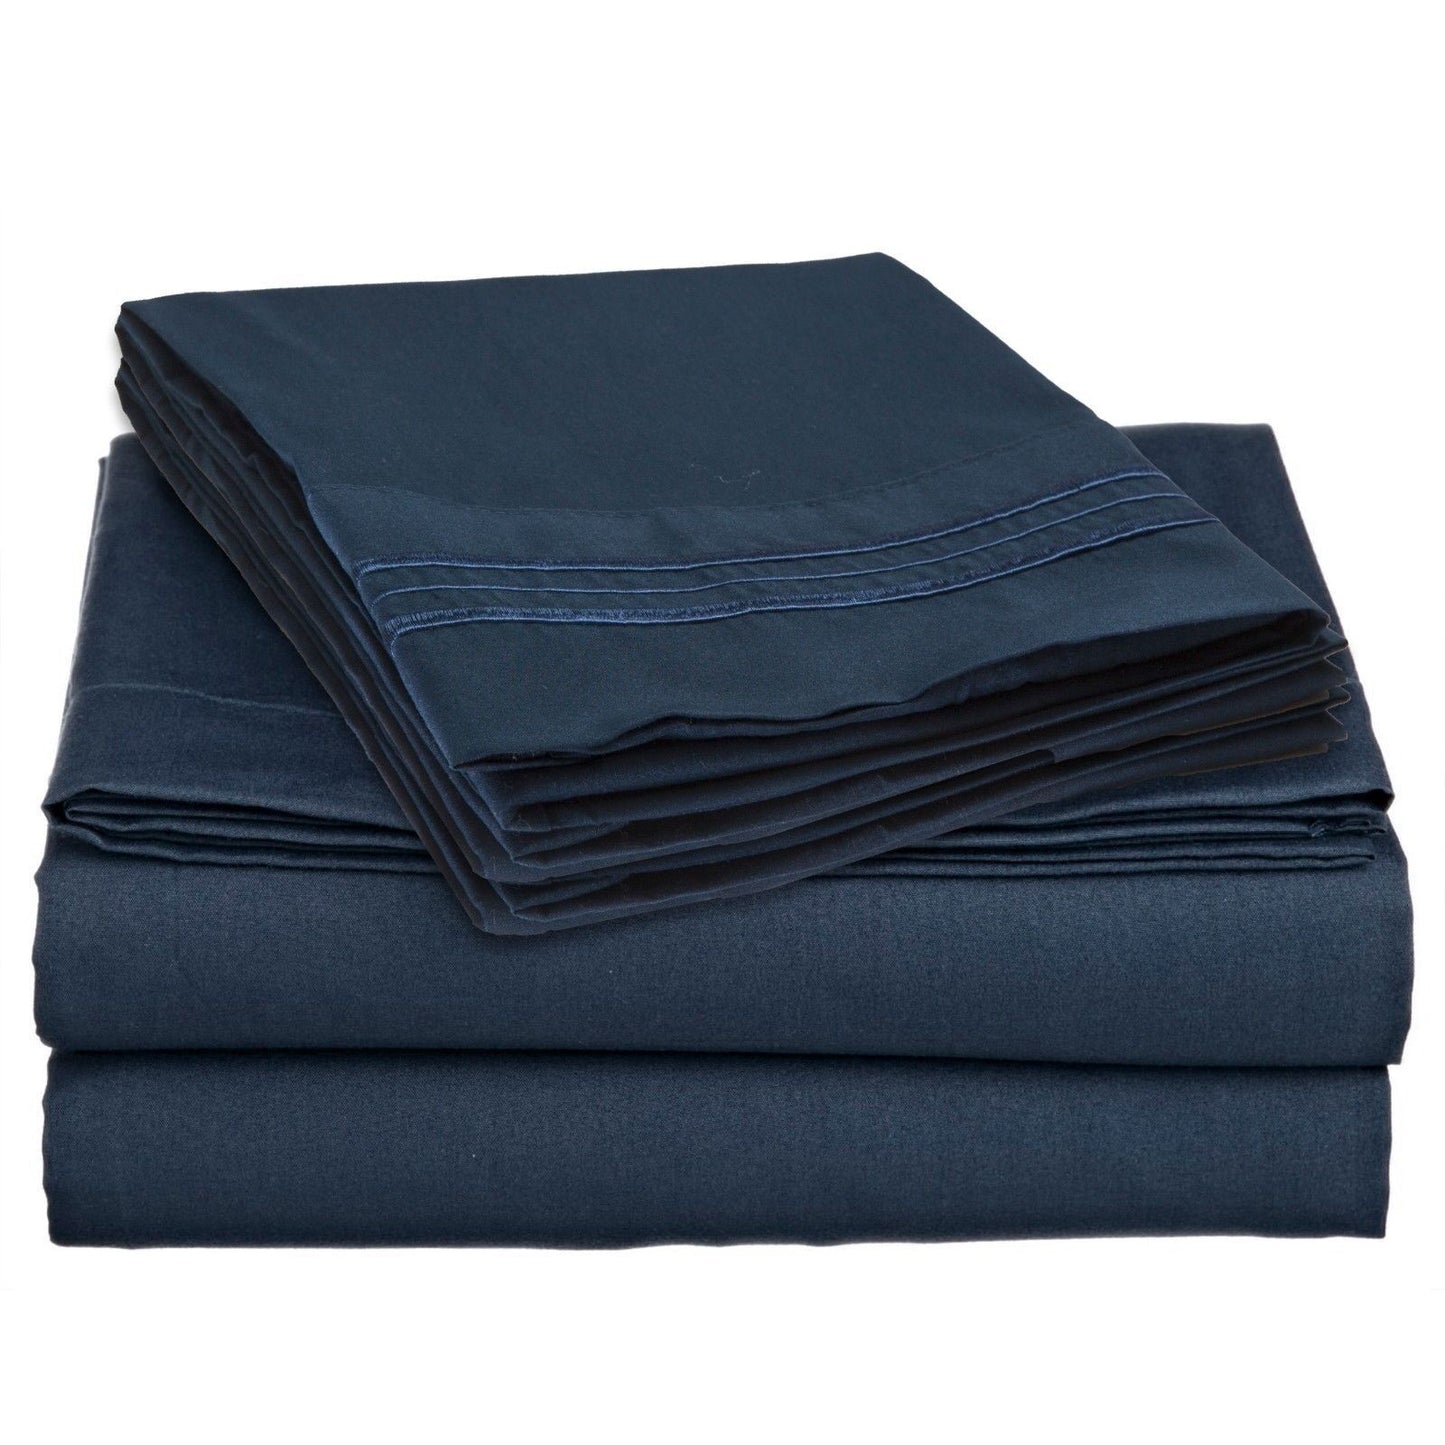 Bed Sheets - Deep Pocket Bed Sheets Set - Soft King Queen Twin Full California King - Queen / Blue